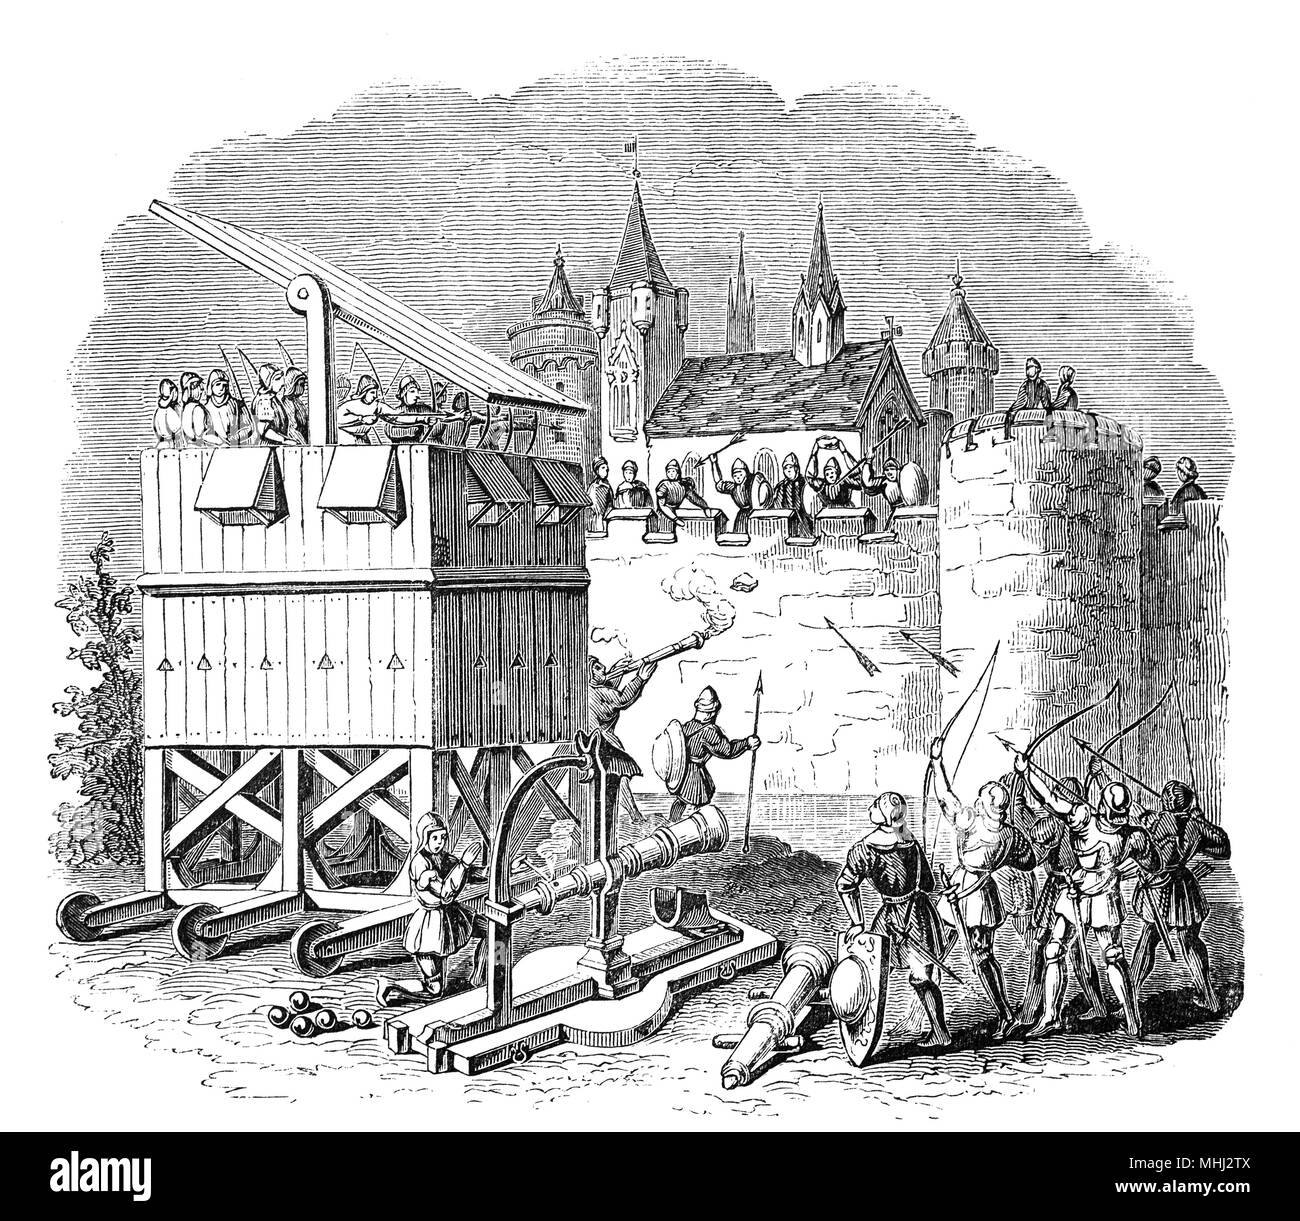 A siege tower in the 15th Century from which longbows and crossbows could be used in siege warfare. They were used along side Cannon that replaced the various types of catapults but still included a wide variety of siege engines like scaling ladders and battering rams. Stock Photo